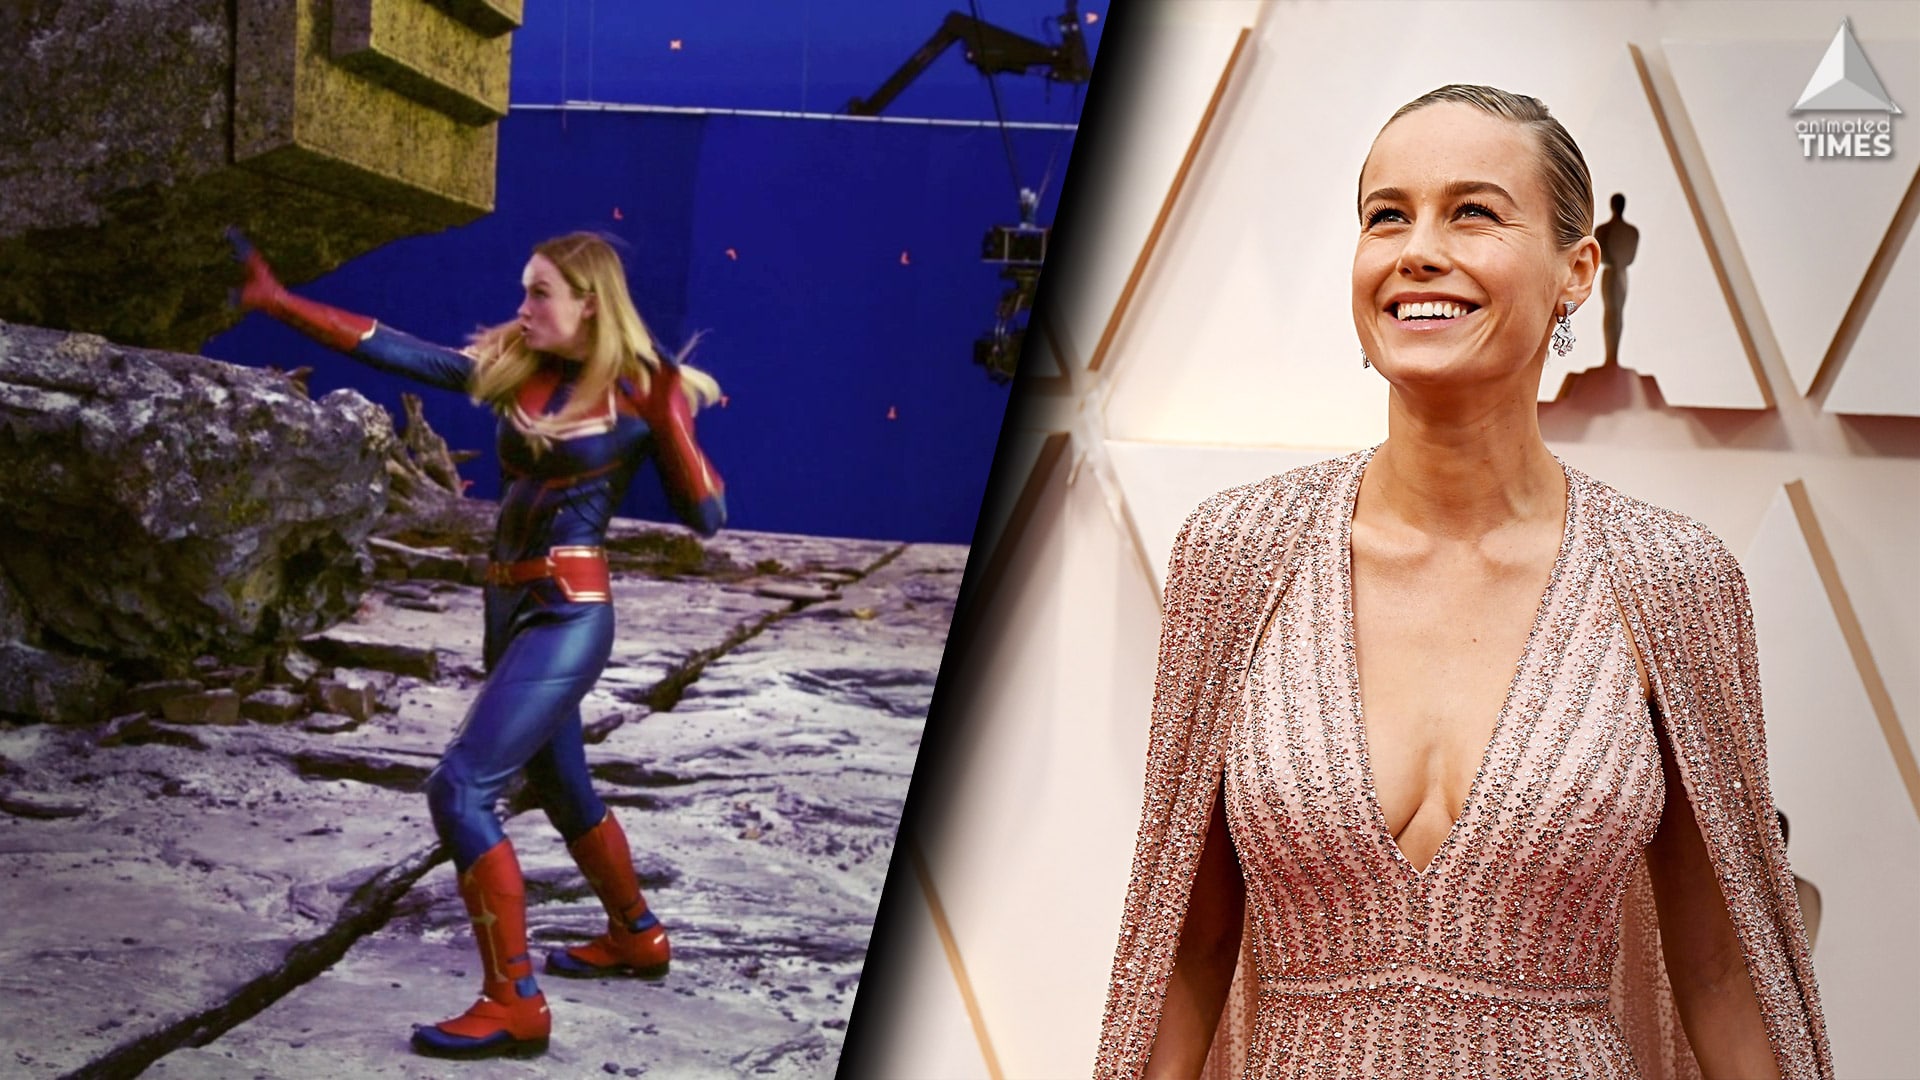 Captain Marvel: Brie Larson Shares “Audition Storytime” With Fans